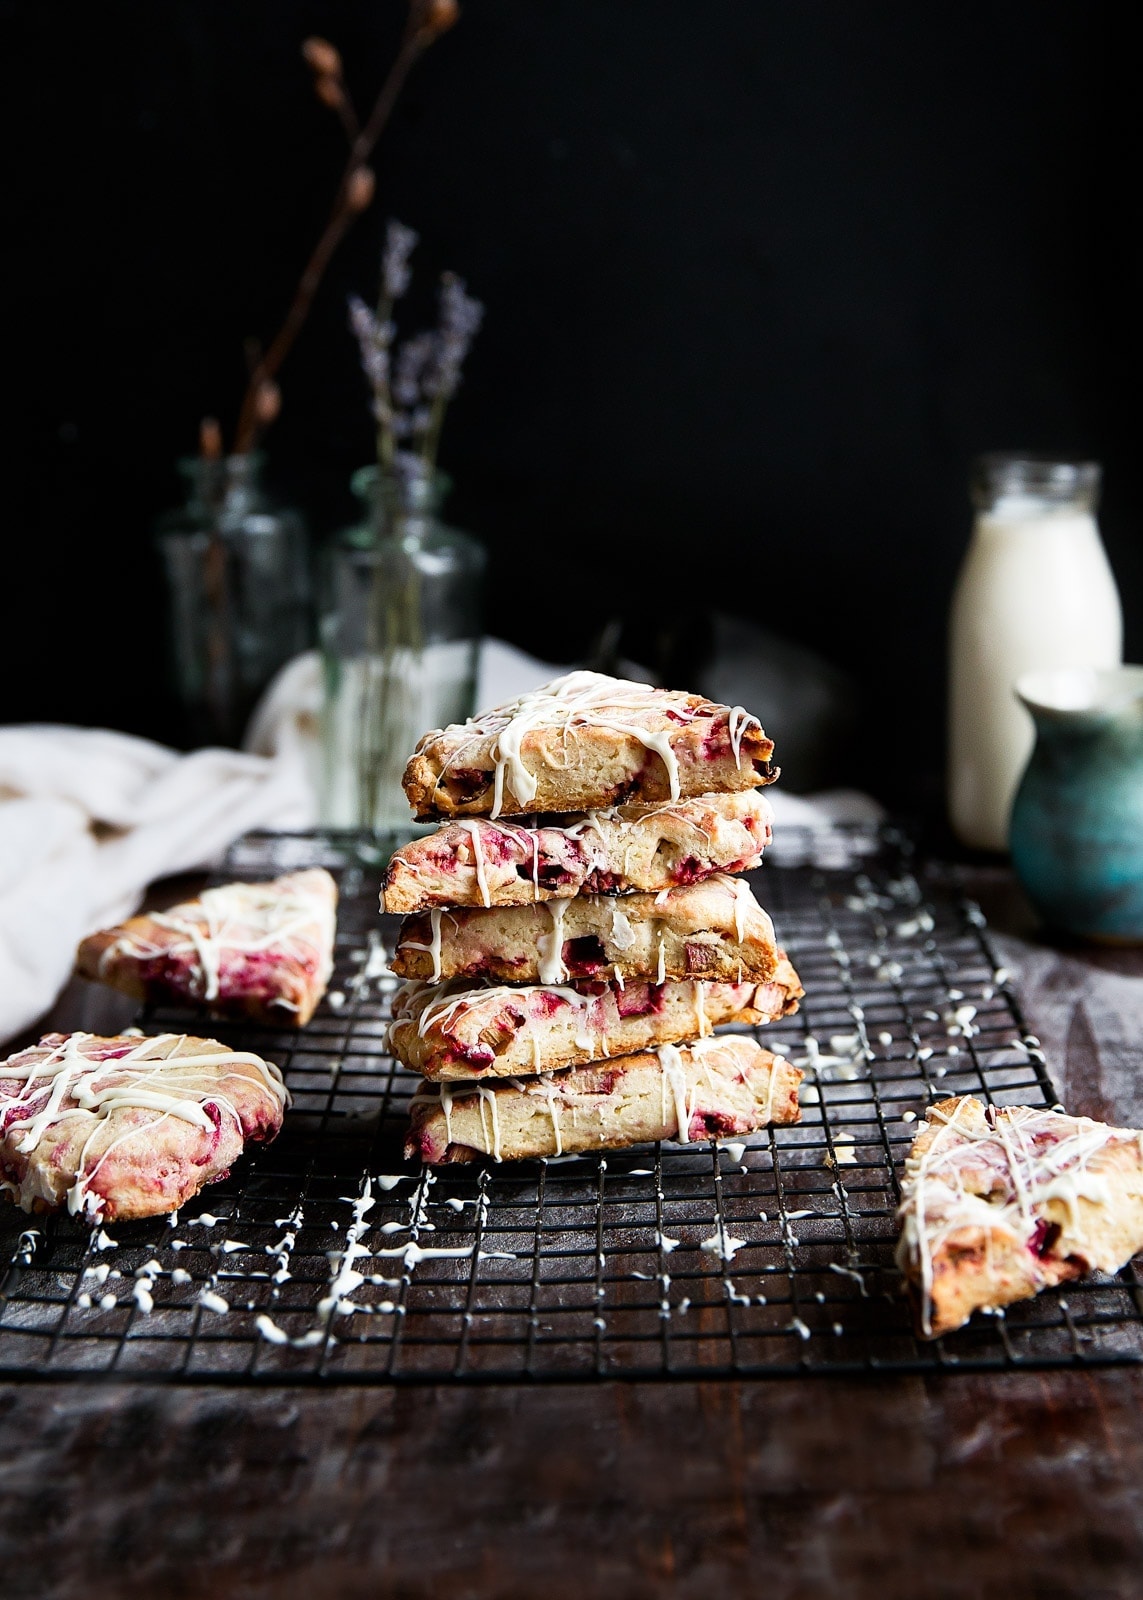 White Chocolate Raspberry Rhubarb scones that are sweet, tart, and totally breakfast-worthy.